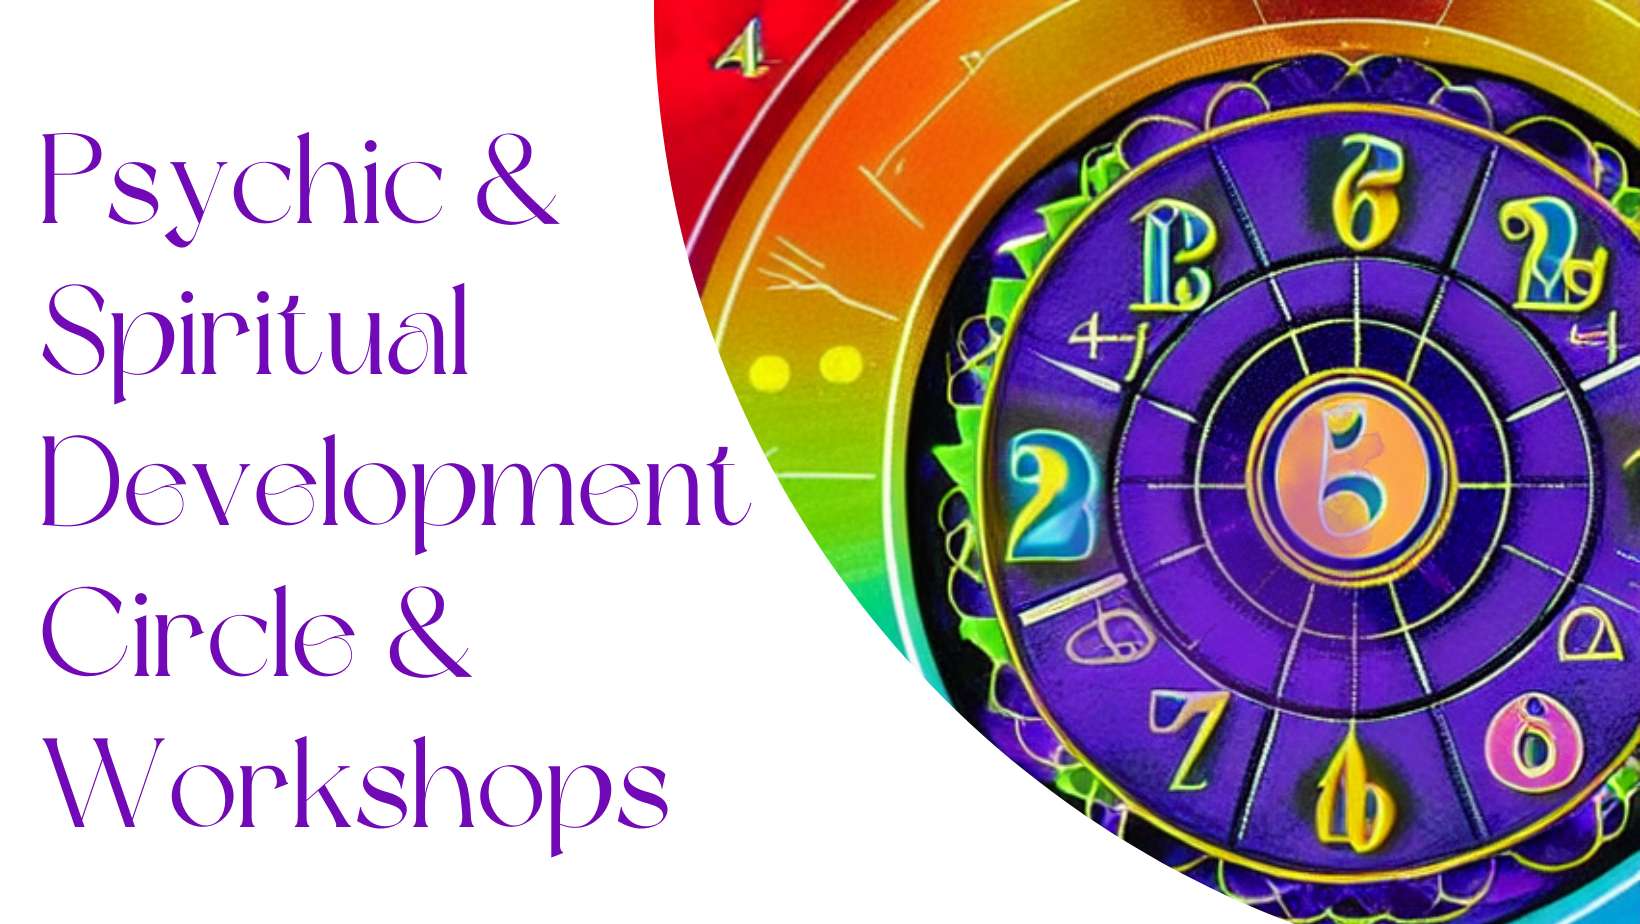 psychic and spiritual development circle and workshops